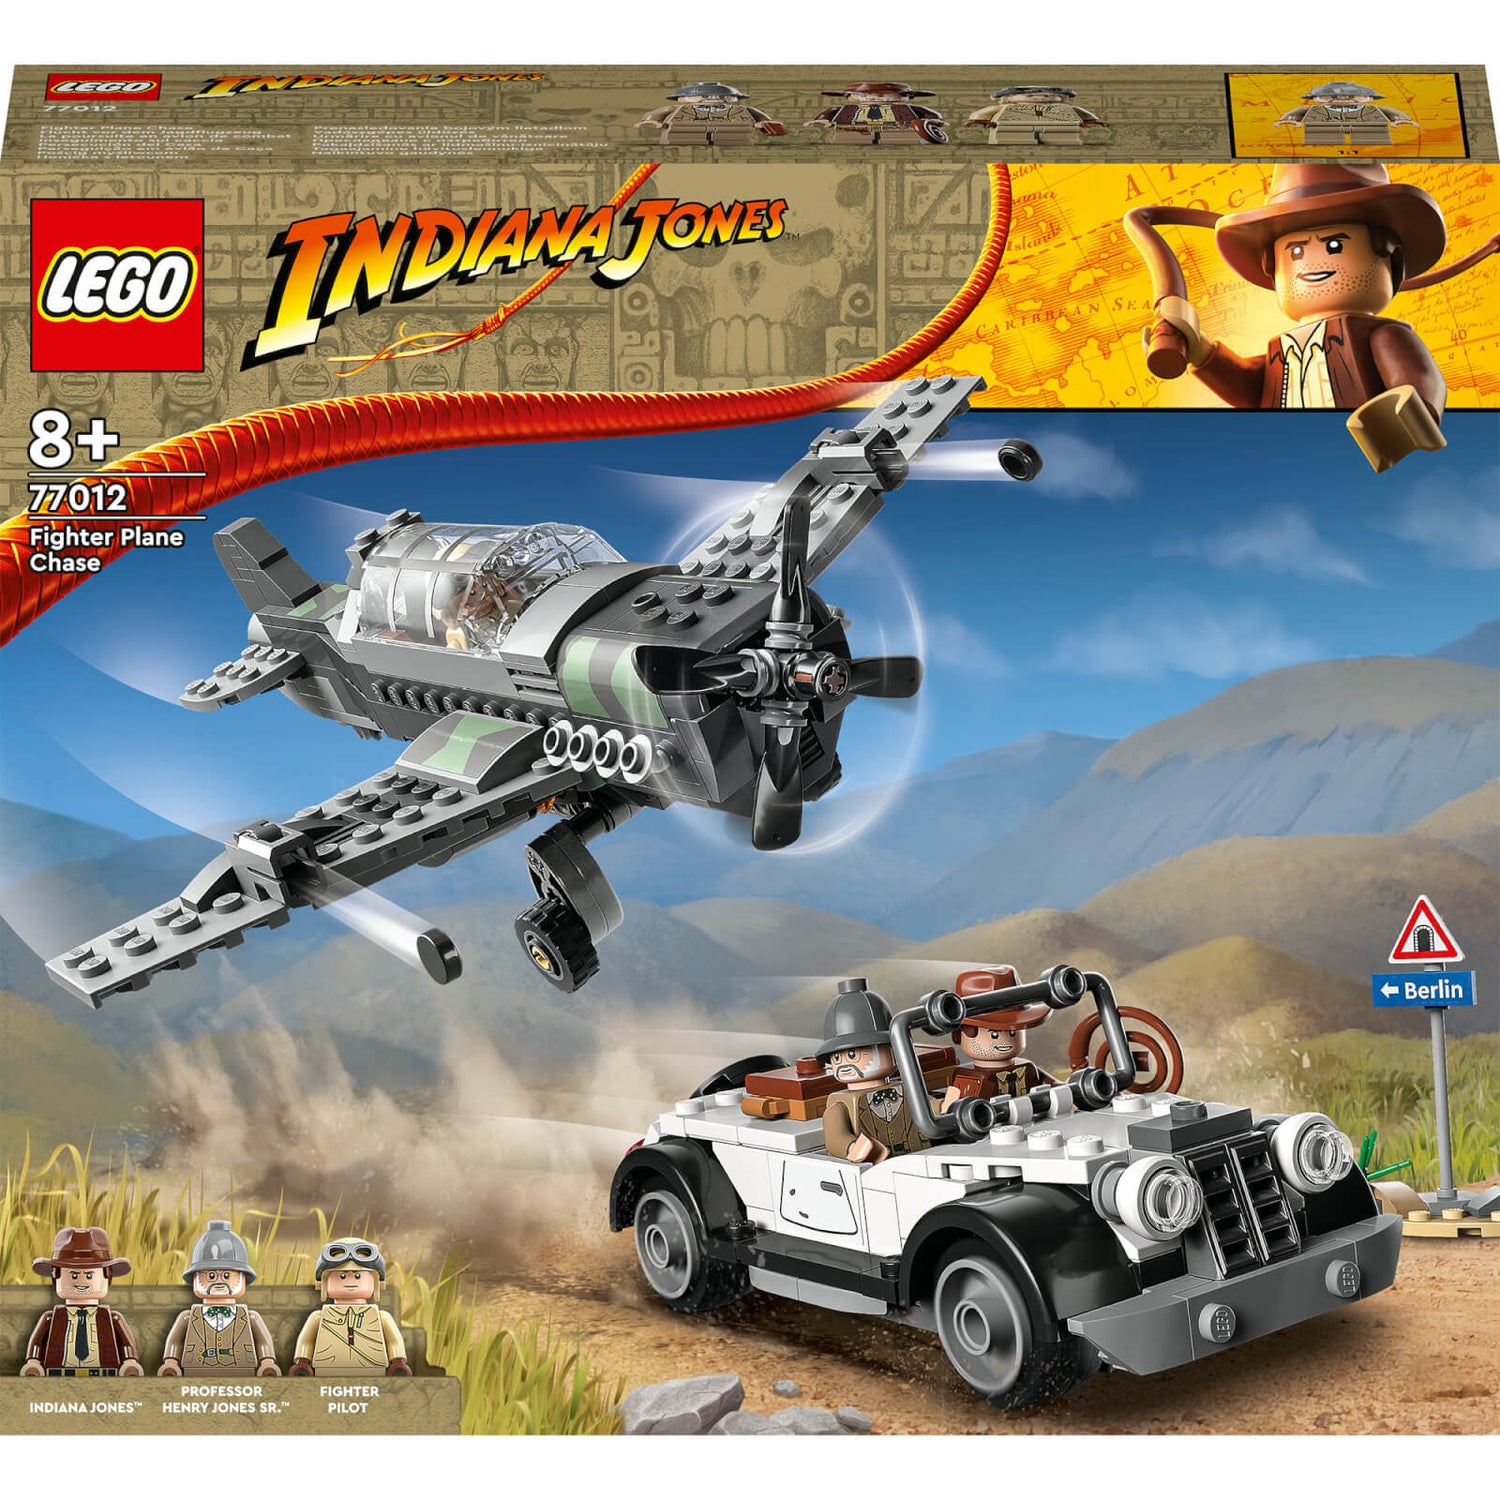 LEGO Indiana Jones Fighter Plane Chase with Toy Car (77012)